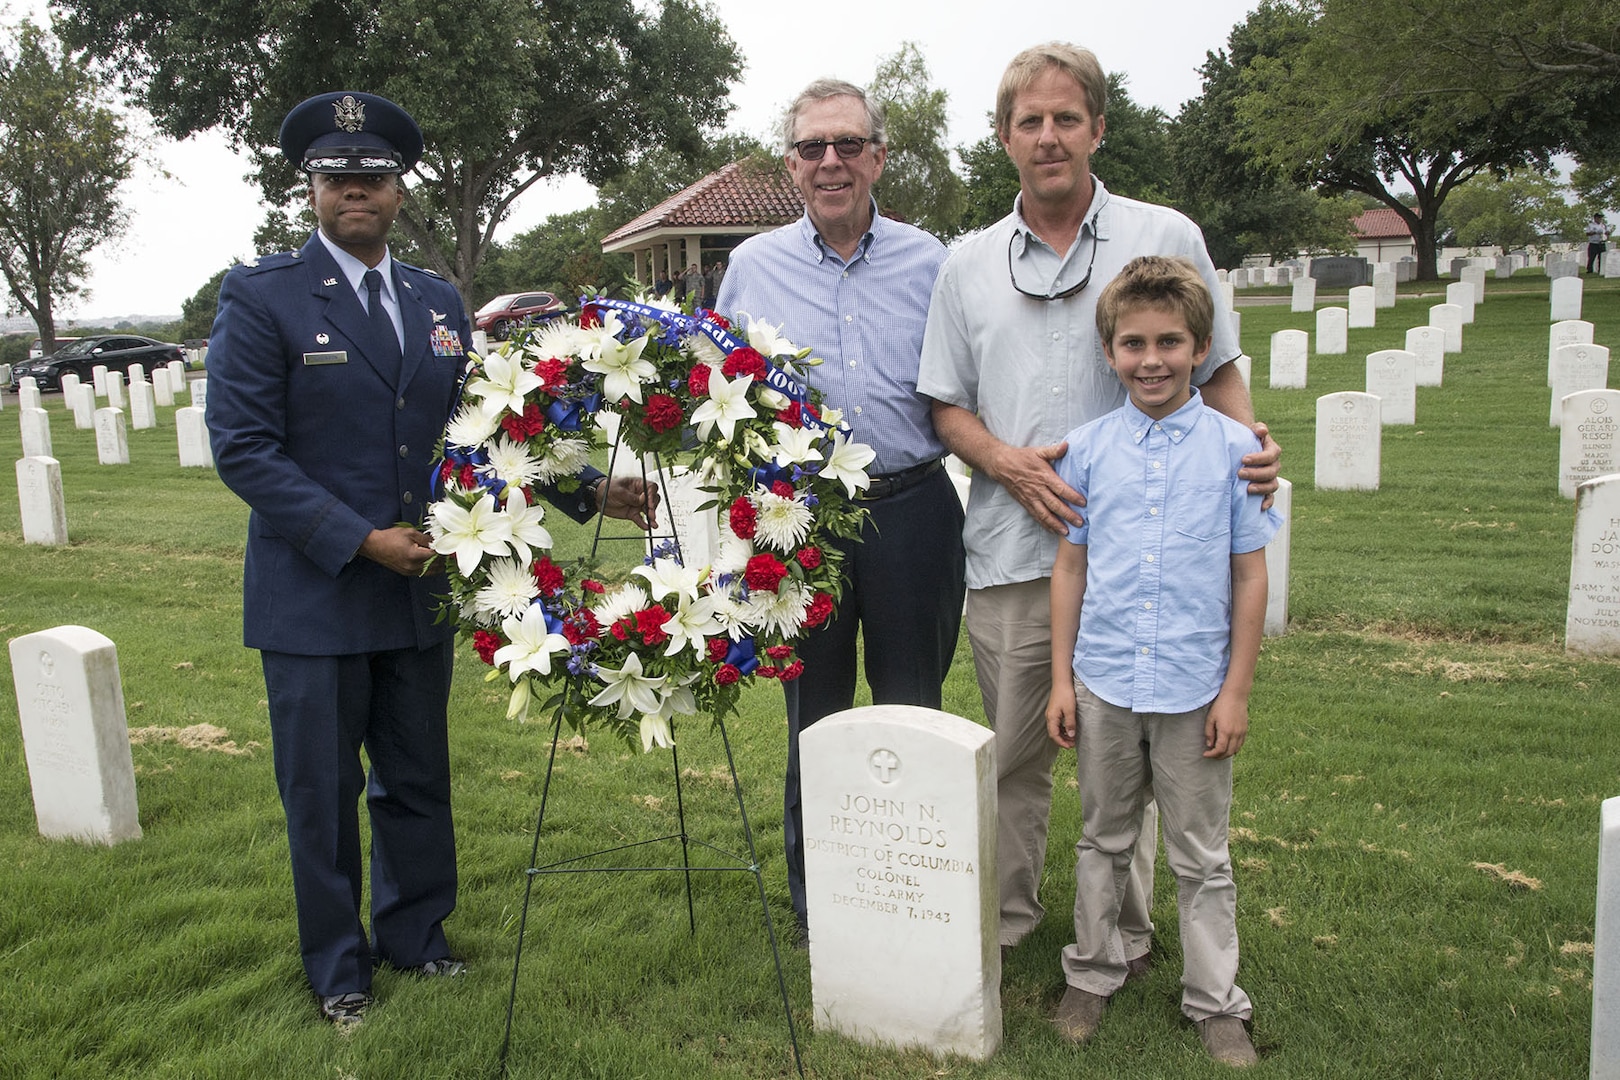 Lt. Col. Christopher Robinson, 91st Cyberspace Operations Squadron Commander, lays flowers on the grave of founding squadron commander Col. John Reynolds alongside members of Reynolds’ family Aug. 24 at Joint Base San Antonio-Fort Sam Houston, Texas. The 91st COS began on Aug. 20, 1917 as the 91st Aero Squadron under Col Reynolds’ command, a full 100 years ago. (US Air Force photo/Olivia Mendoza)